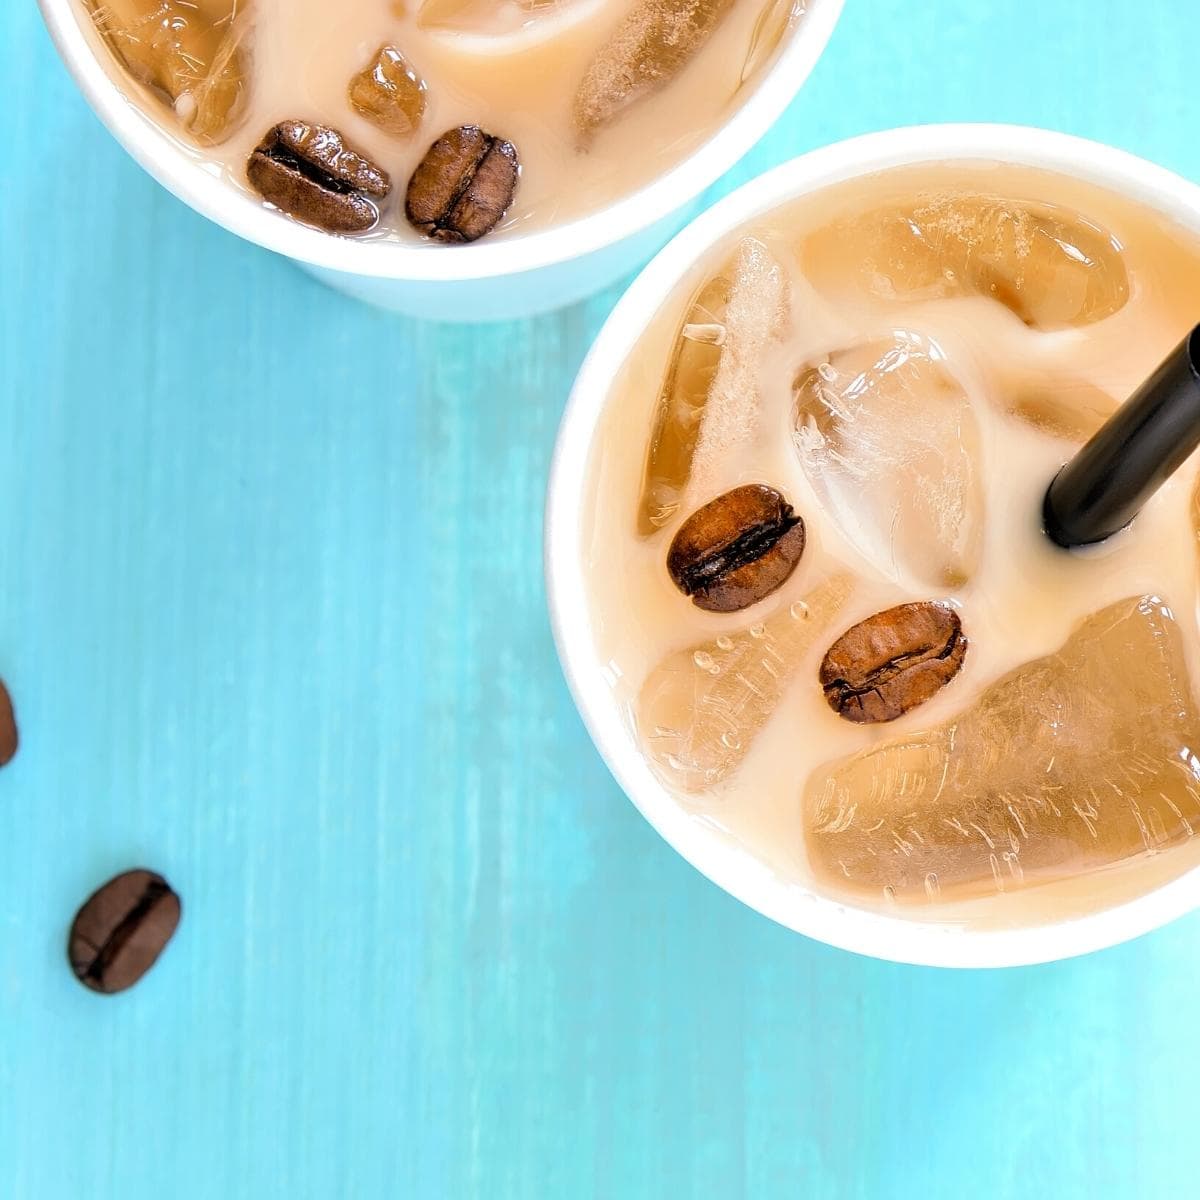 Iced Coffee vs Iced Latte: What's the Difference?